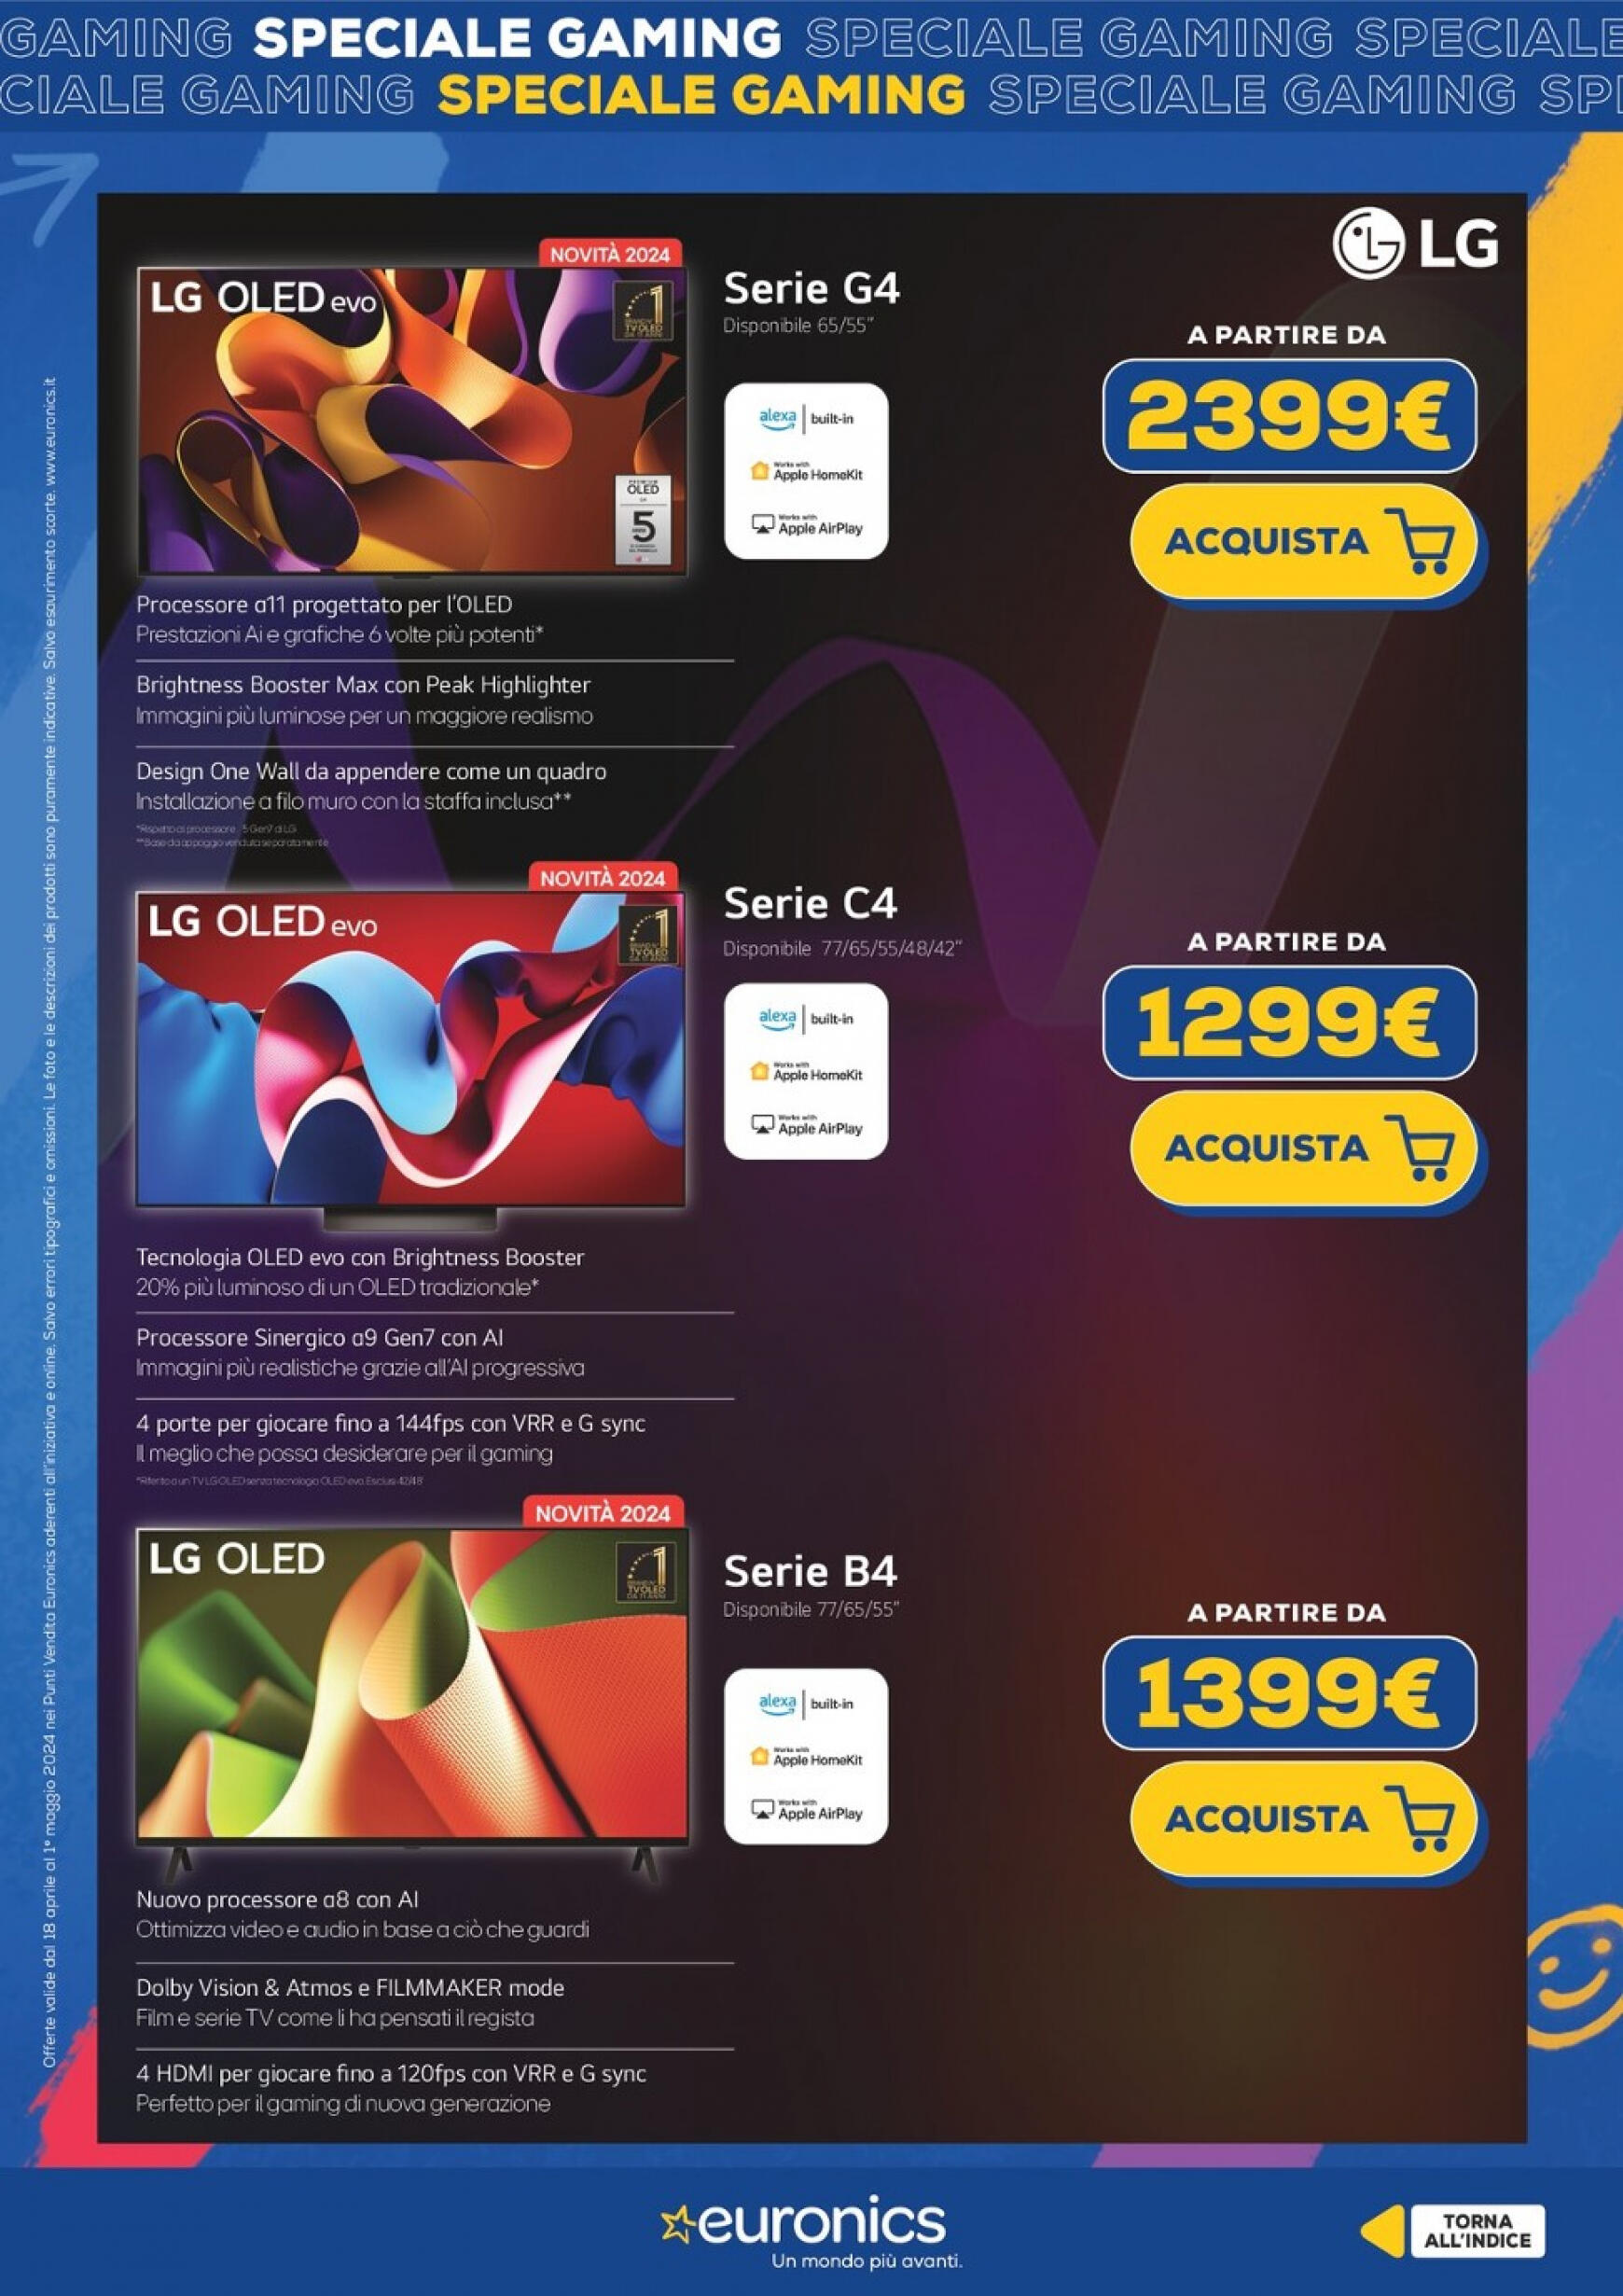 euronics - Nuovo volantino Euronics - Speciale Gaming 18.04. - 01.05. - page: 18